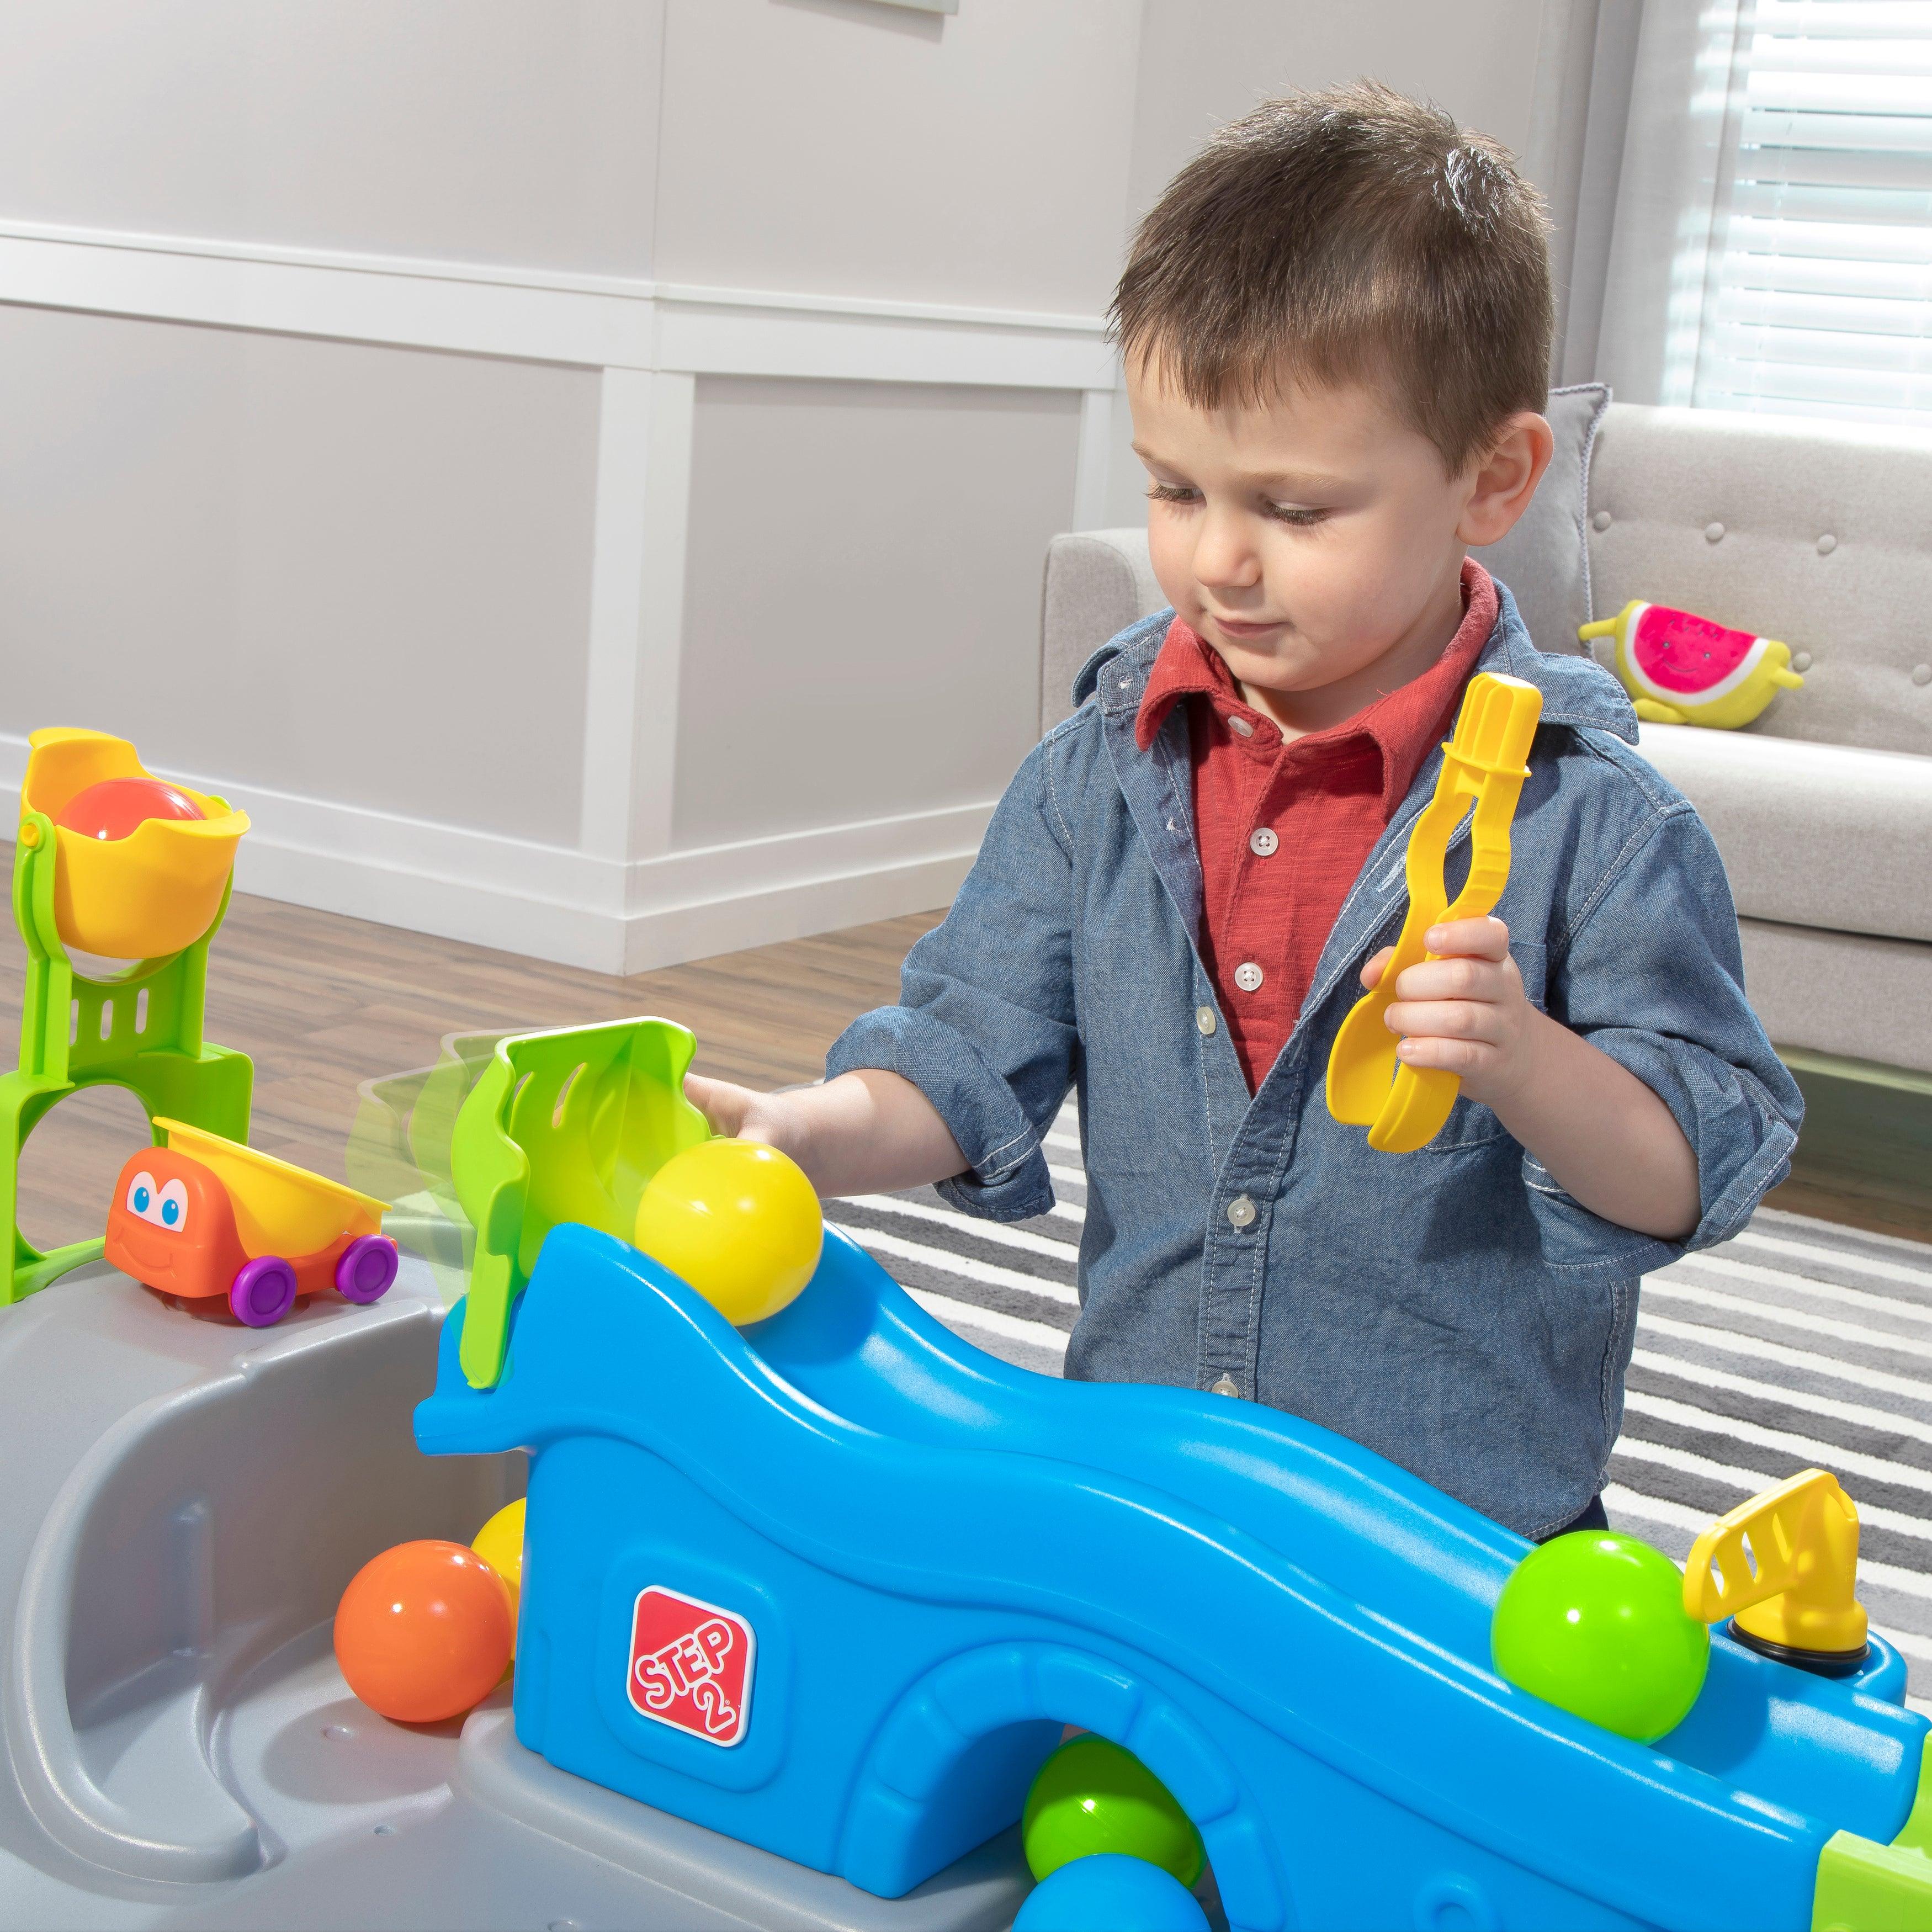 Step2 Ball Buddies Truckin' & Rollin' Play Table STEM & Ball Toy with 12 Accessory Toys for Toddlers - FunCorp India